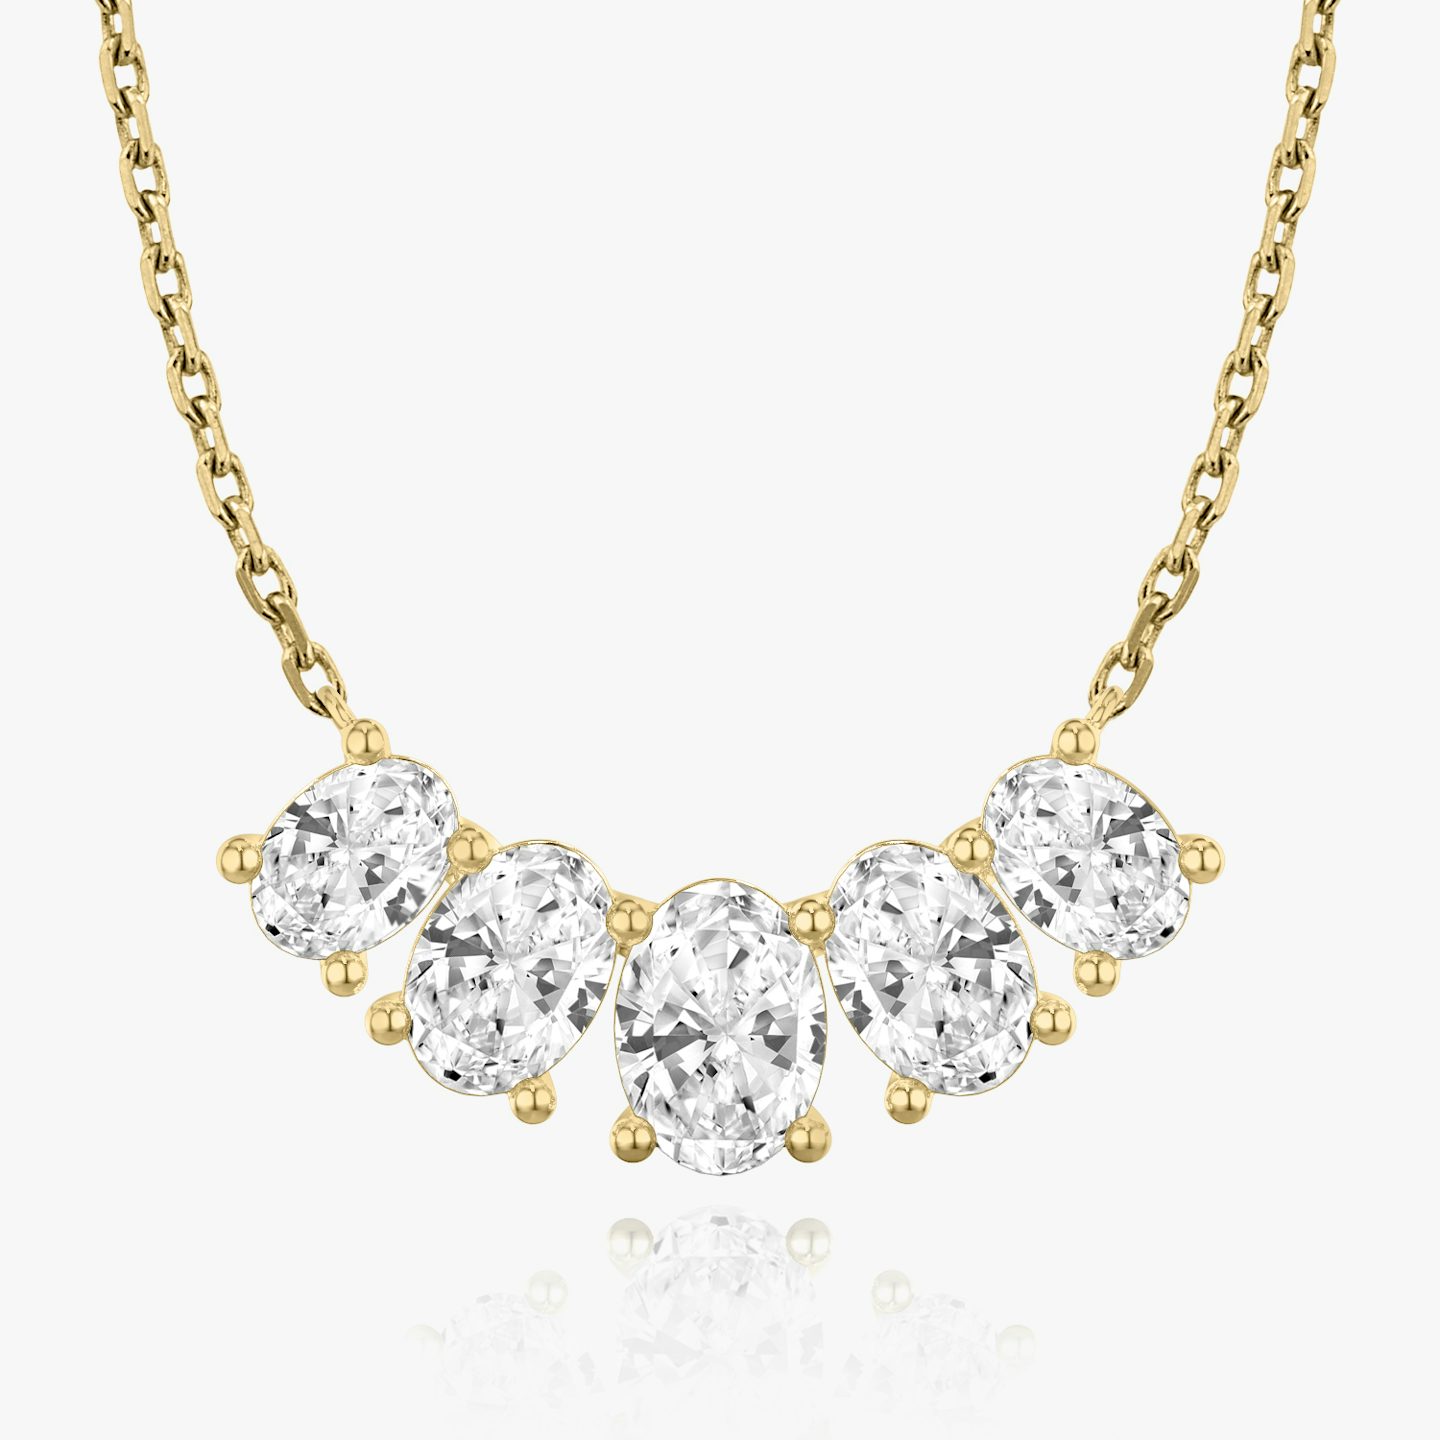 Arc Necklace | Oval | 14k | 18k Yellow Gold | Chain length: 16-18 | Diamond size: Large | Diamond count: 5